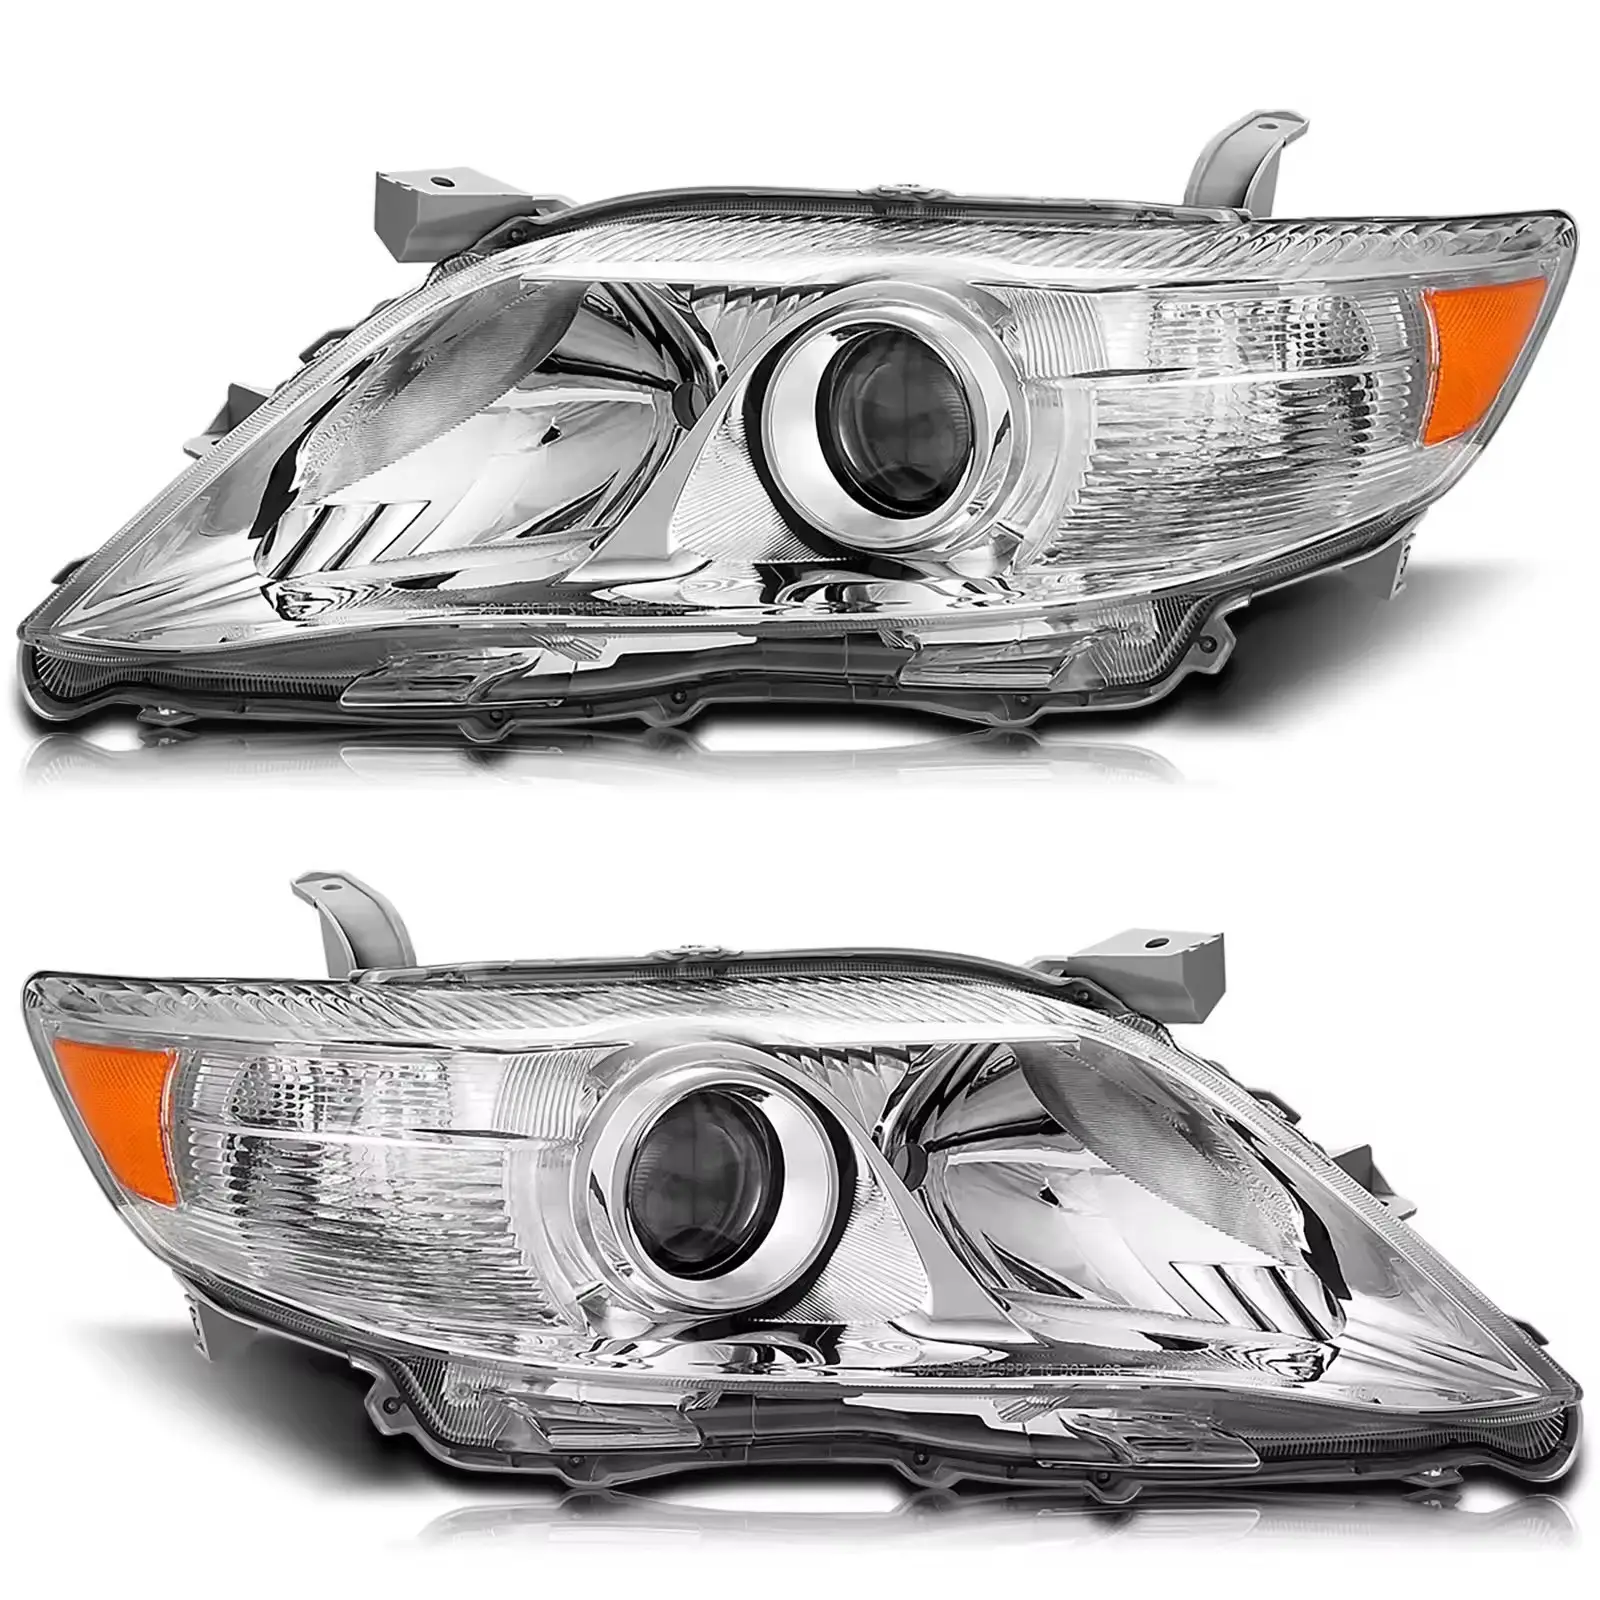 Applicable to Toyota Camry LE/XLE USA 8115006520 8111006520 car headlights